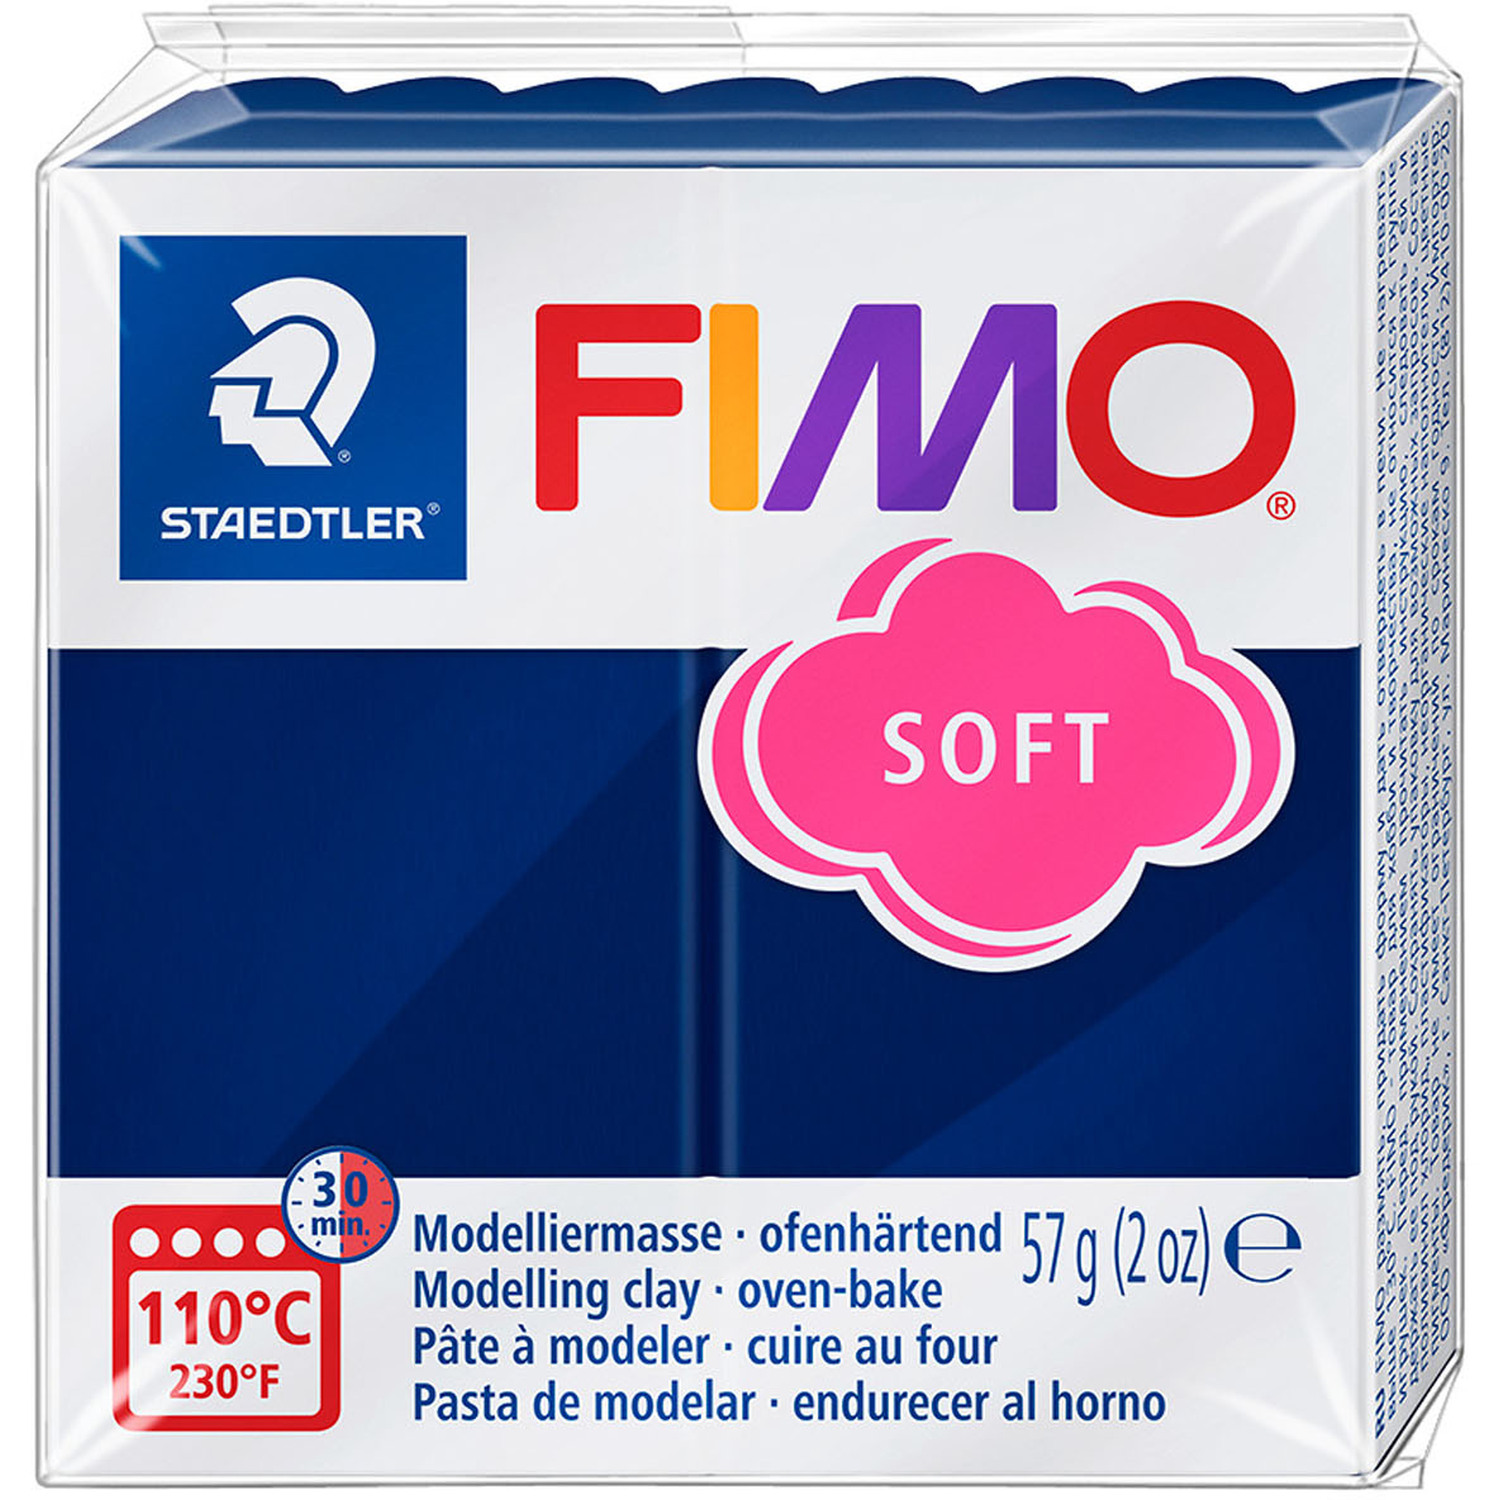 Staedtler FIMO Soft Modelling Clay Block - Pacific Blue Image 3